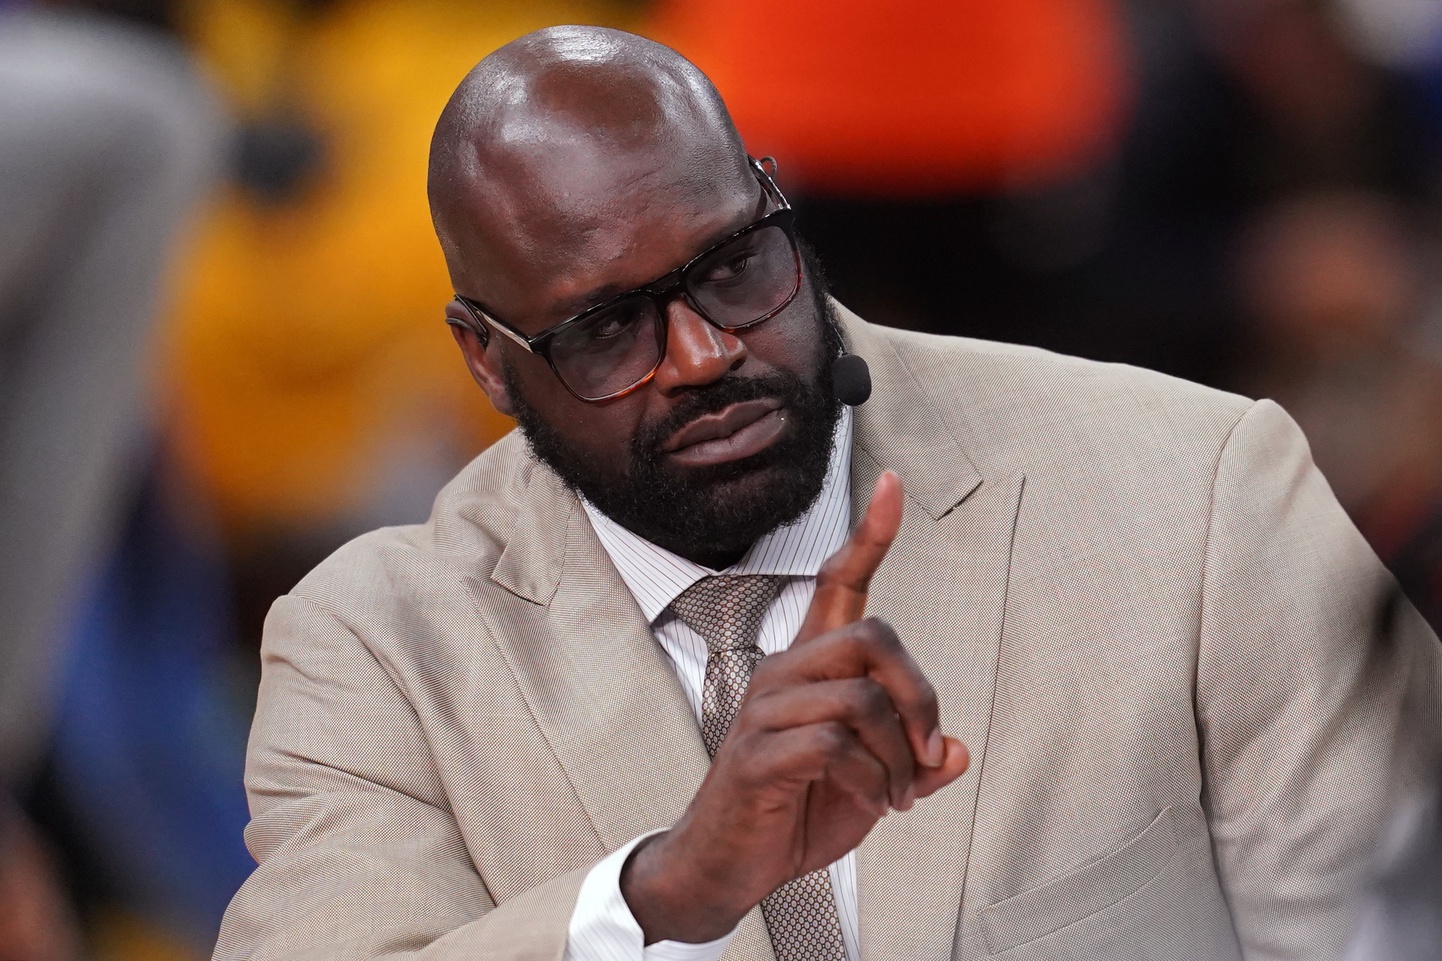 Jun 5, 2022; San Francisco, California, USA; NBA analyst and former player Shaquille O'Neal speaks before the game between the Golden State Warriors and the Boston Celtics during game two of the 2022 NBA Finals at Chase Center. Mandatory Credit: Cary Edmondson-USA TODAY Sports